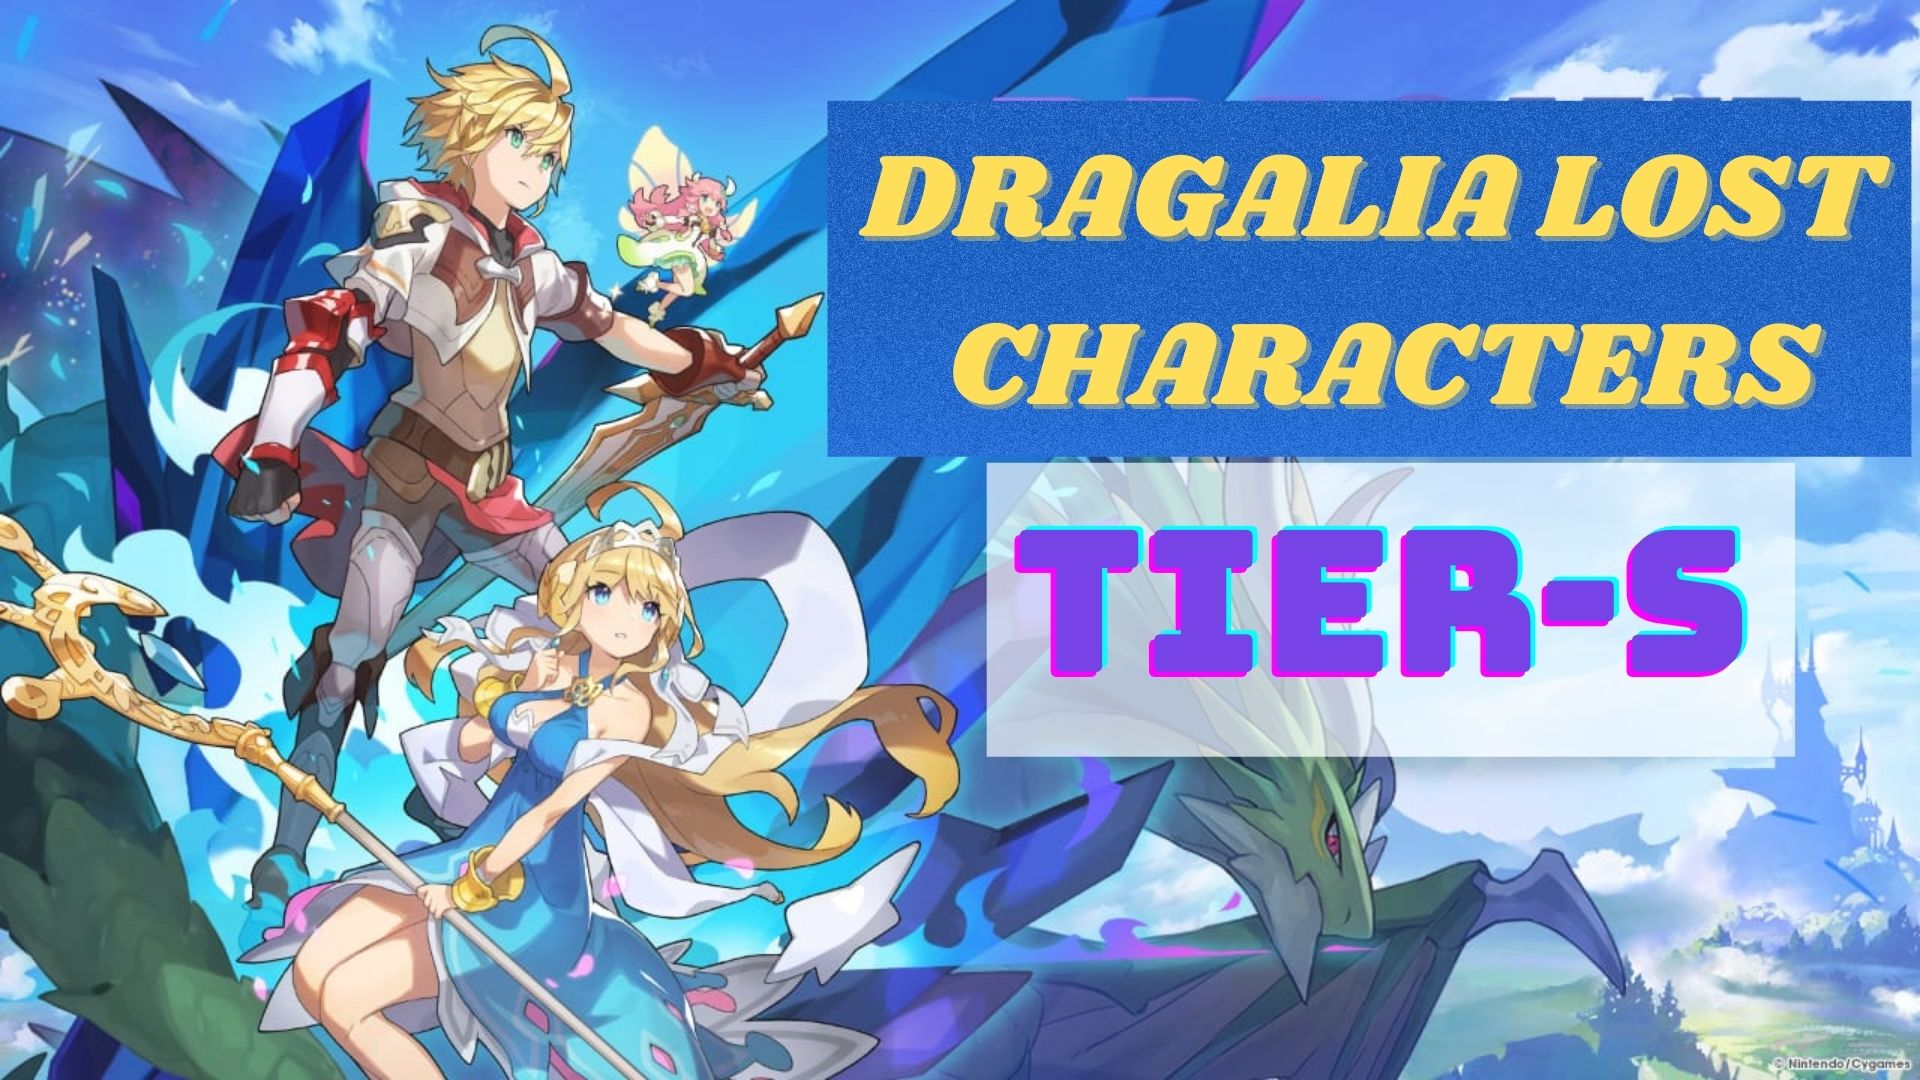 Tier-S Dragalia Lost Characters 